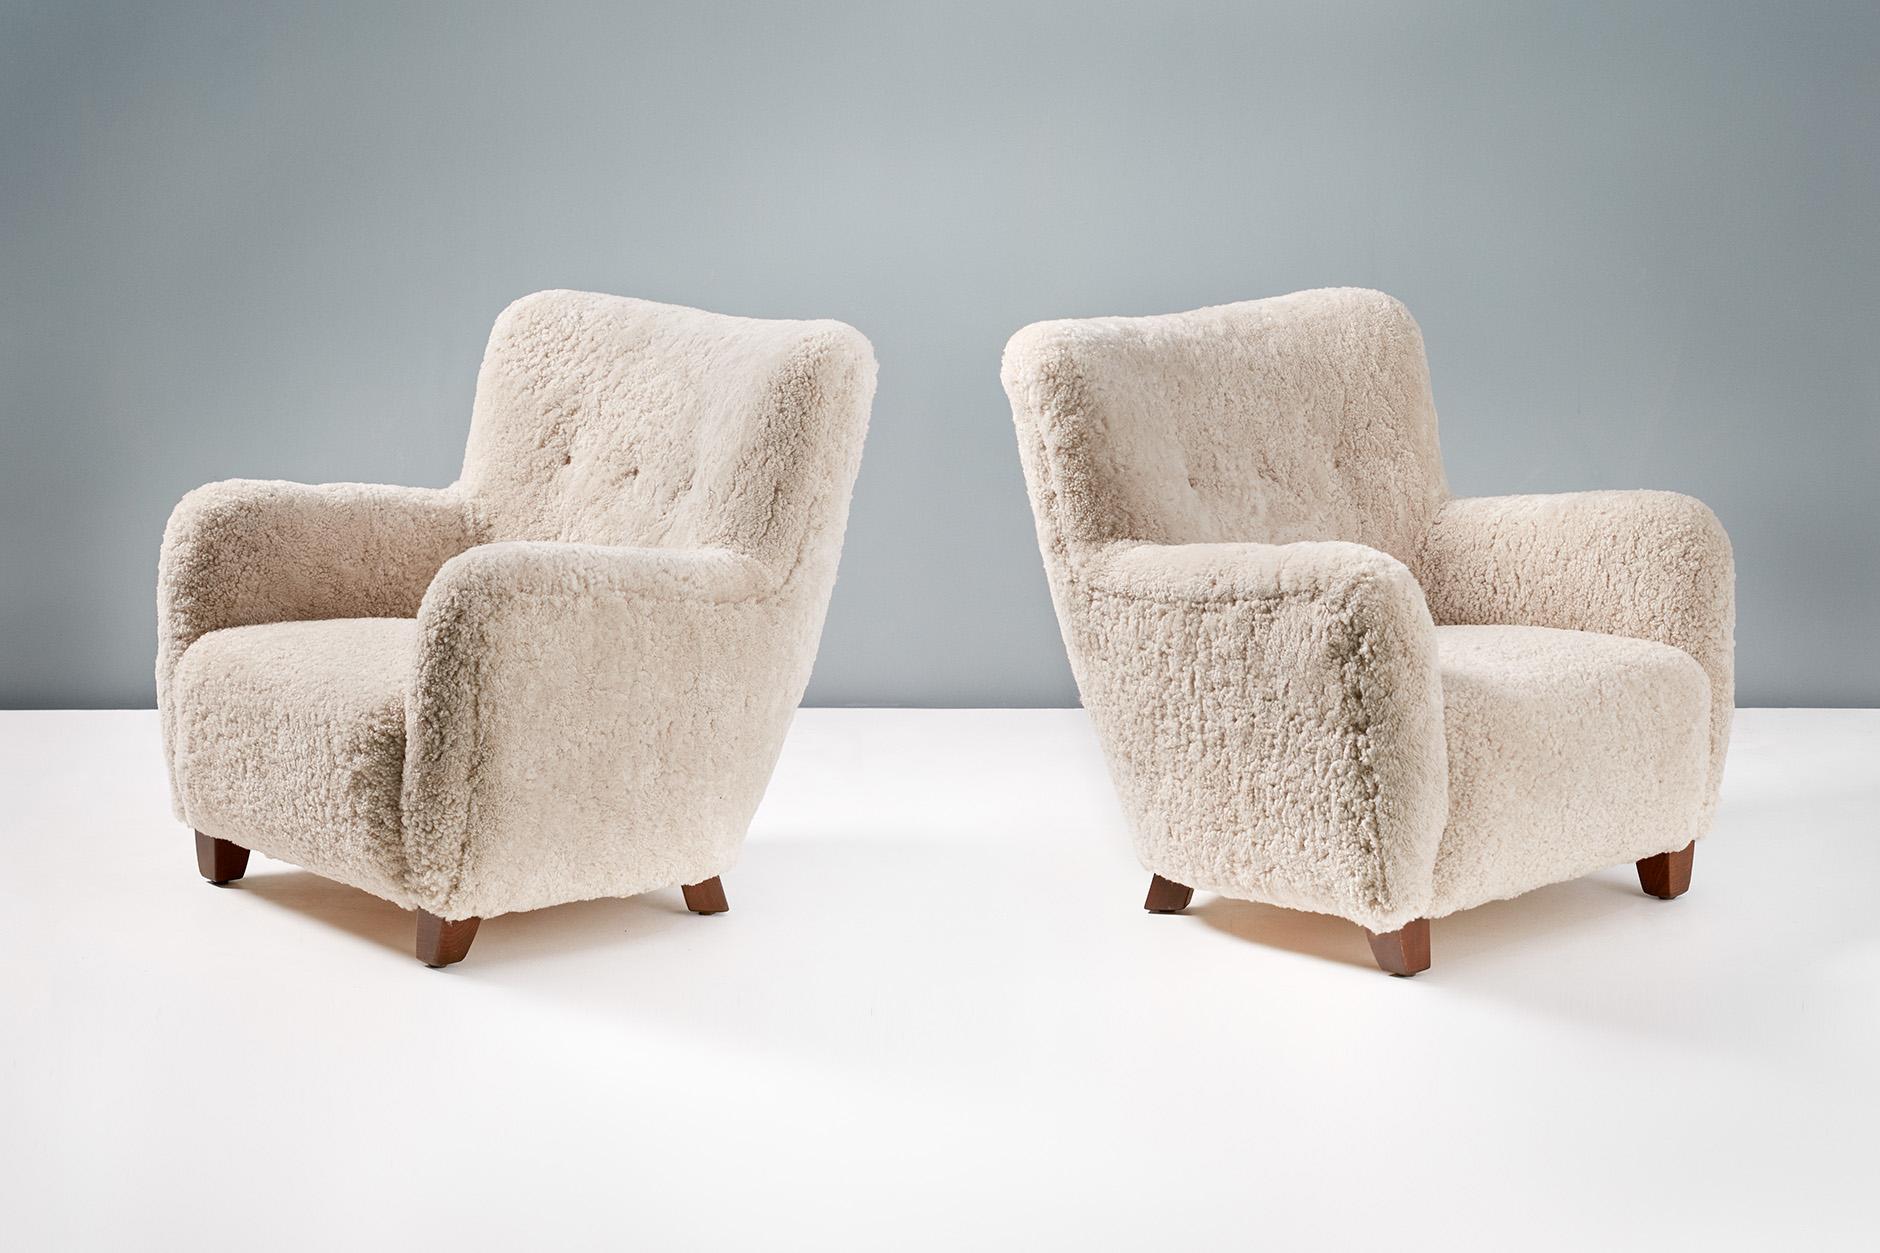 A pair of custom-made armchairs based on the Danish Modern styles of the 1940-50s. 

These high-end productions are handmade to order at our workshops in England. The chair legs are available in oiled walnut, oiled oak or walnut. The chairs are